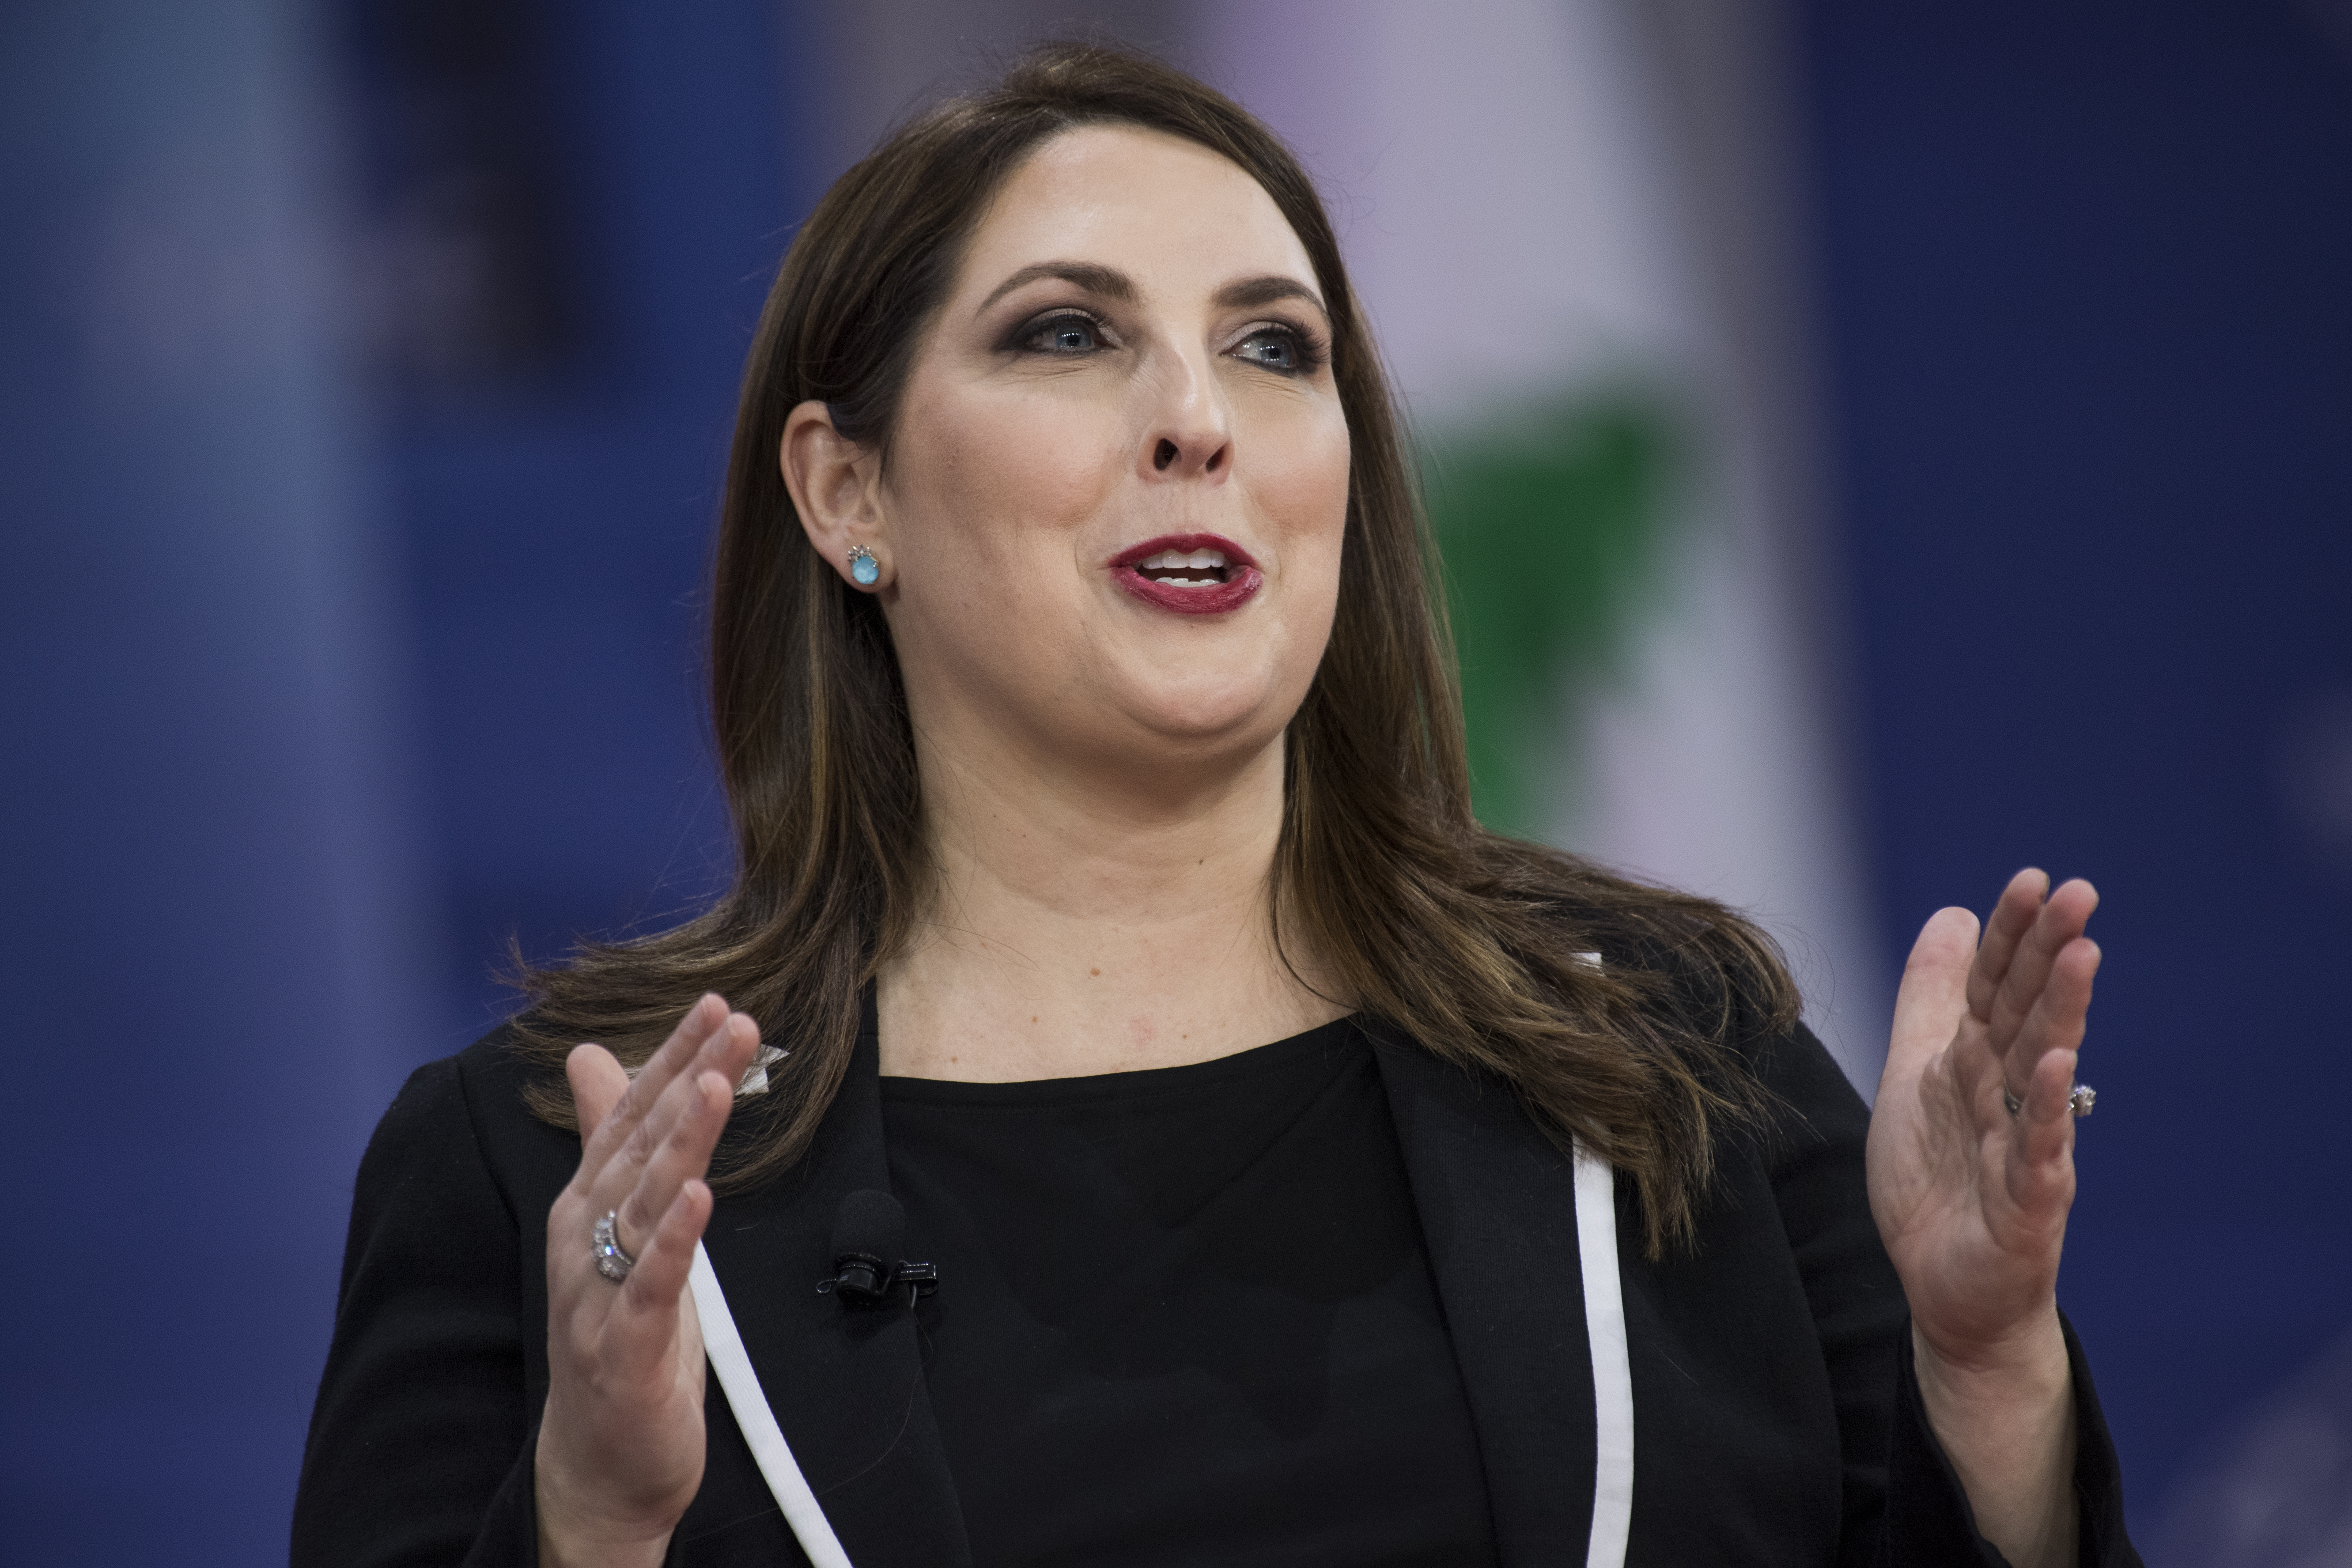 UNITED STATES - FEBRUARY 23: Ronna McDaniel, chairwoman of the Republican National Committee, is interviewed during the Conservative Political Action Conference at the Gaylord National Resort in Oxon Hill, Md., on February 23, 2018. (Photo By Tom Williams/CQ Roll Call)